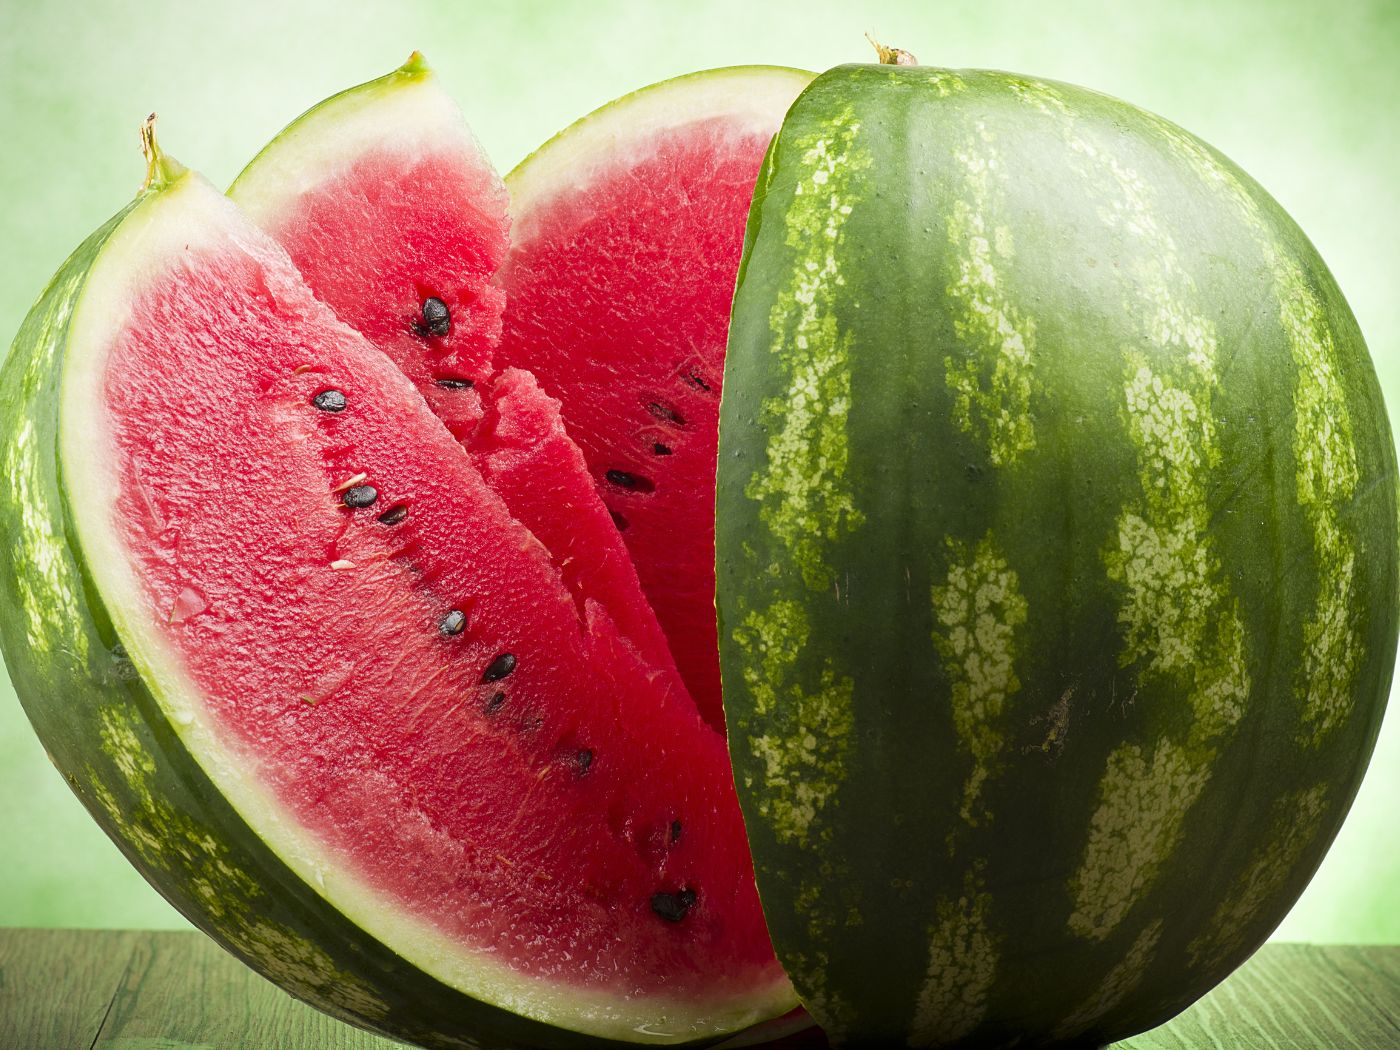 Watermelon Nutrition Facts and Health Benefits